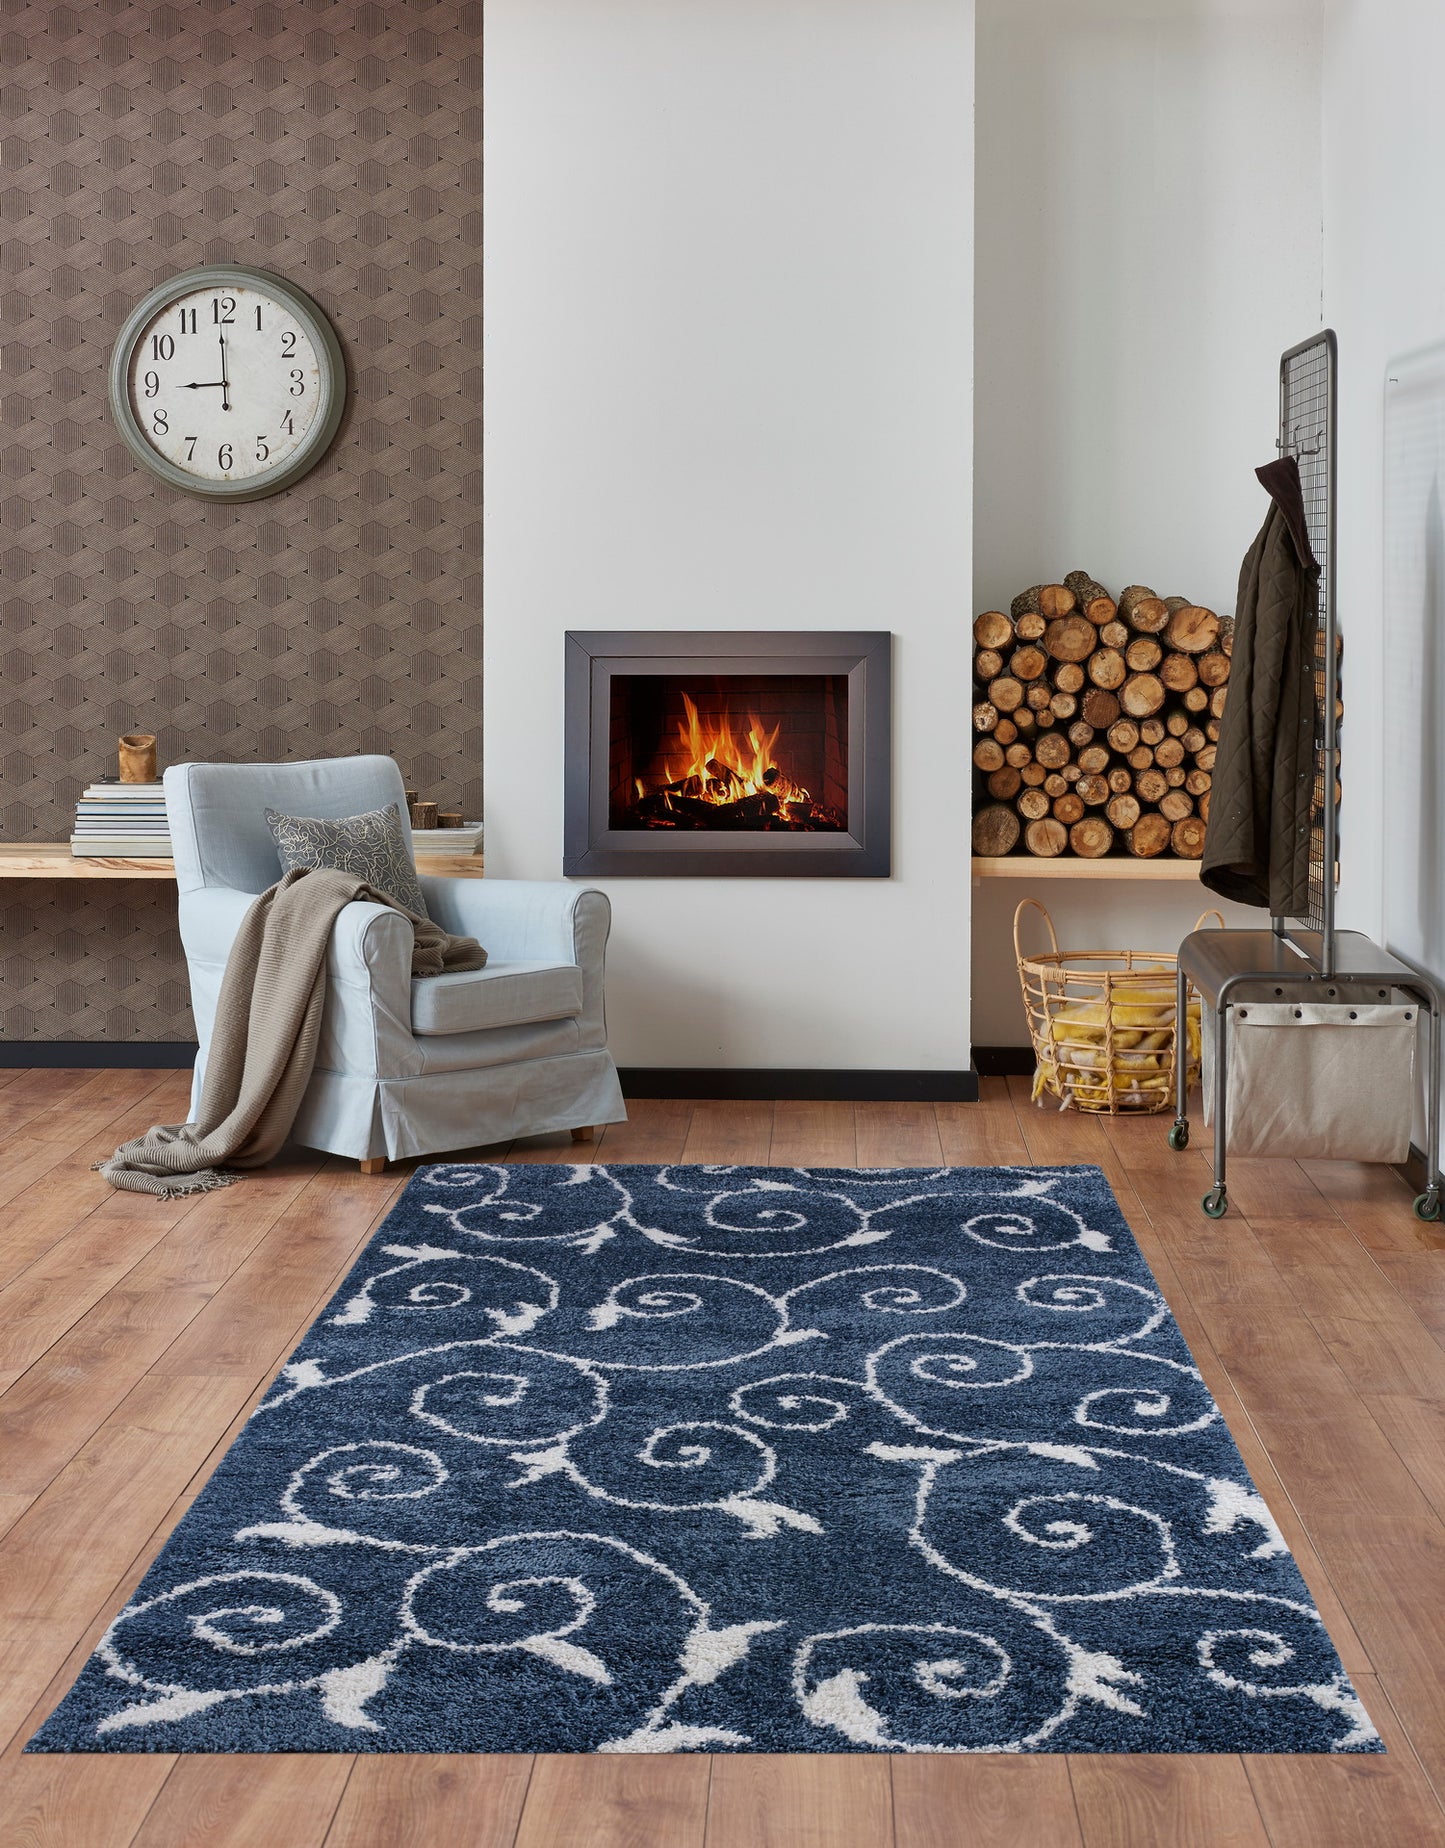 ladole rugs shaggy rabat abstract pattern sustainable spirals style indoor small mat doormat rug in blue white 110 x 211 57cm x 90cm 2x5, 3x5 Runner Rug, Entry Way, Entrance, Balcony, Bedside, Home Office, Table Top